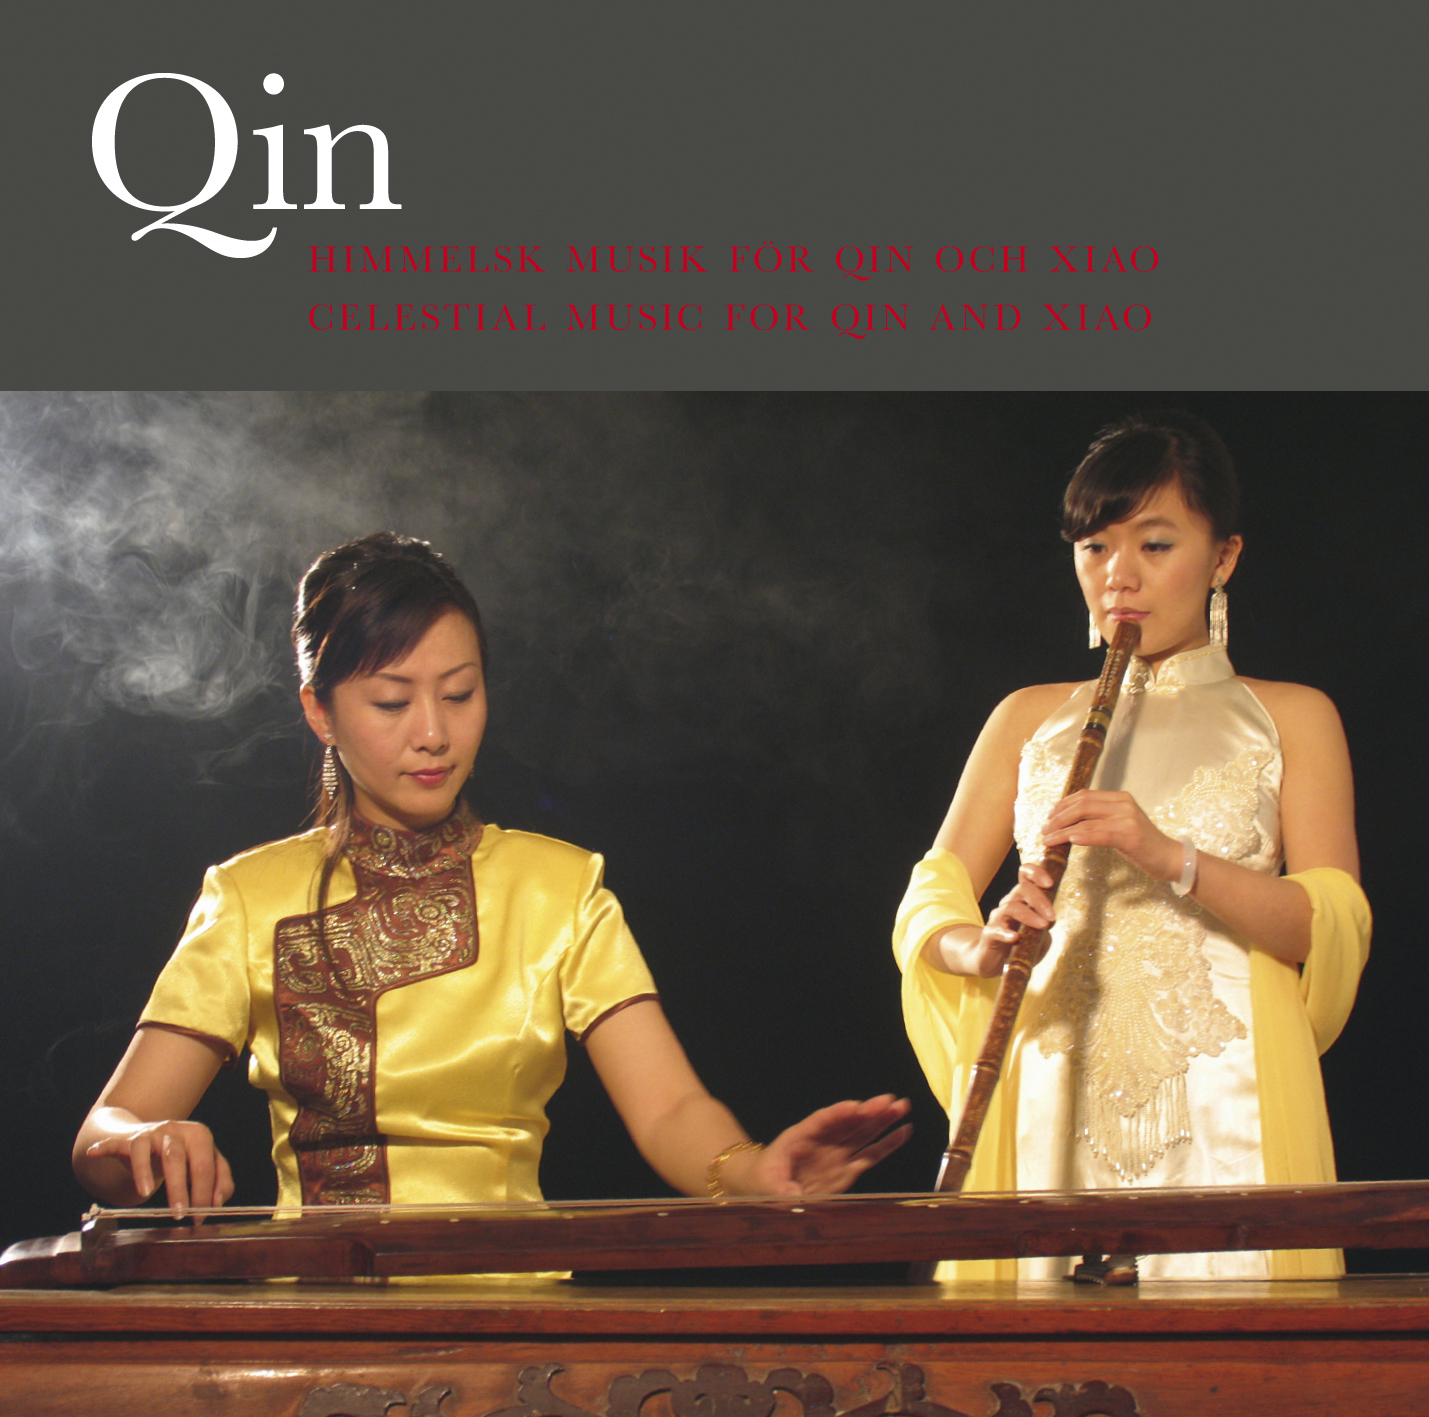 Qin: Celestial Music for Qin and Xiao